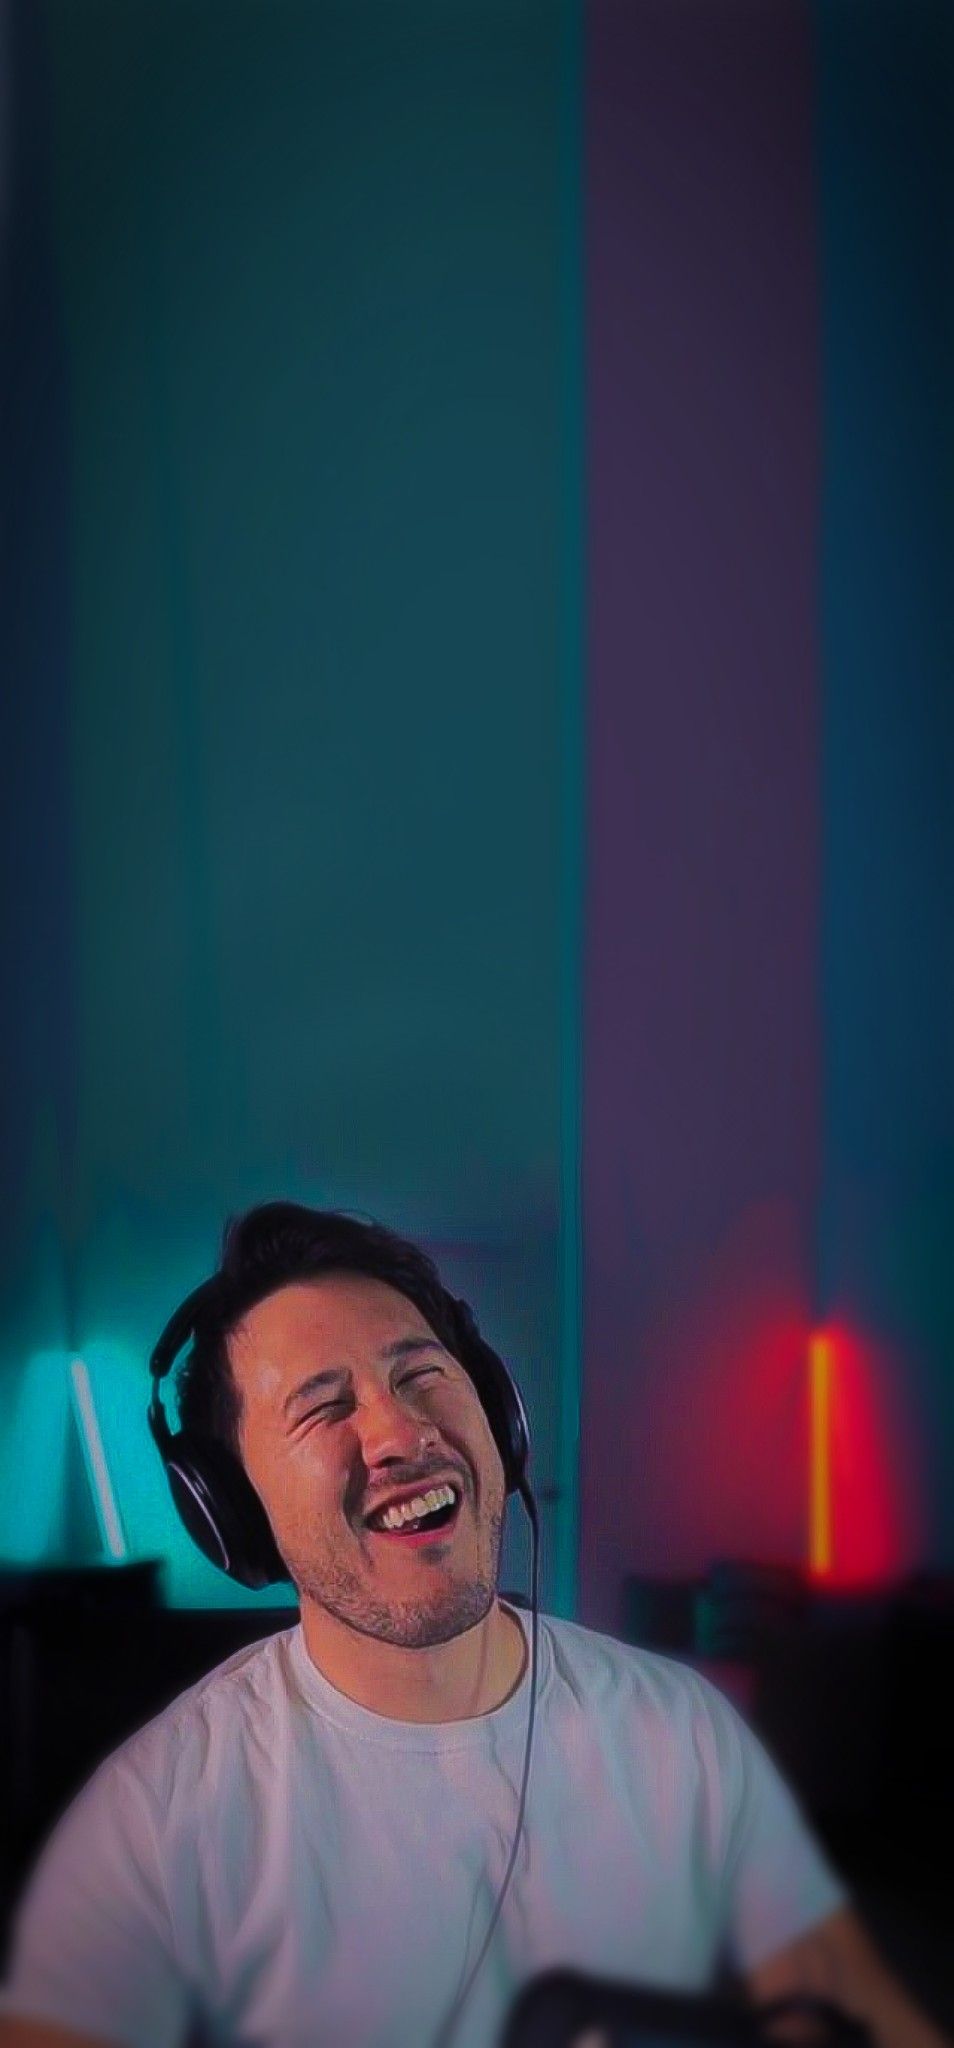 A man wearing headphones and laughing - Markiplier